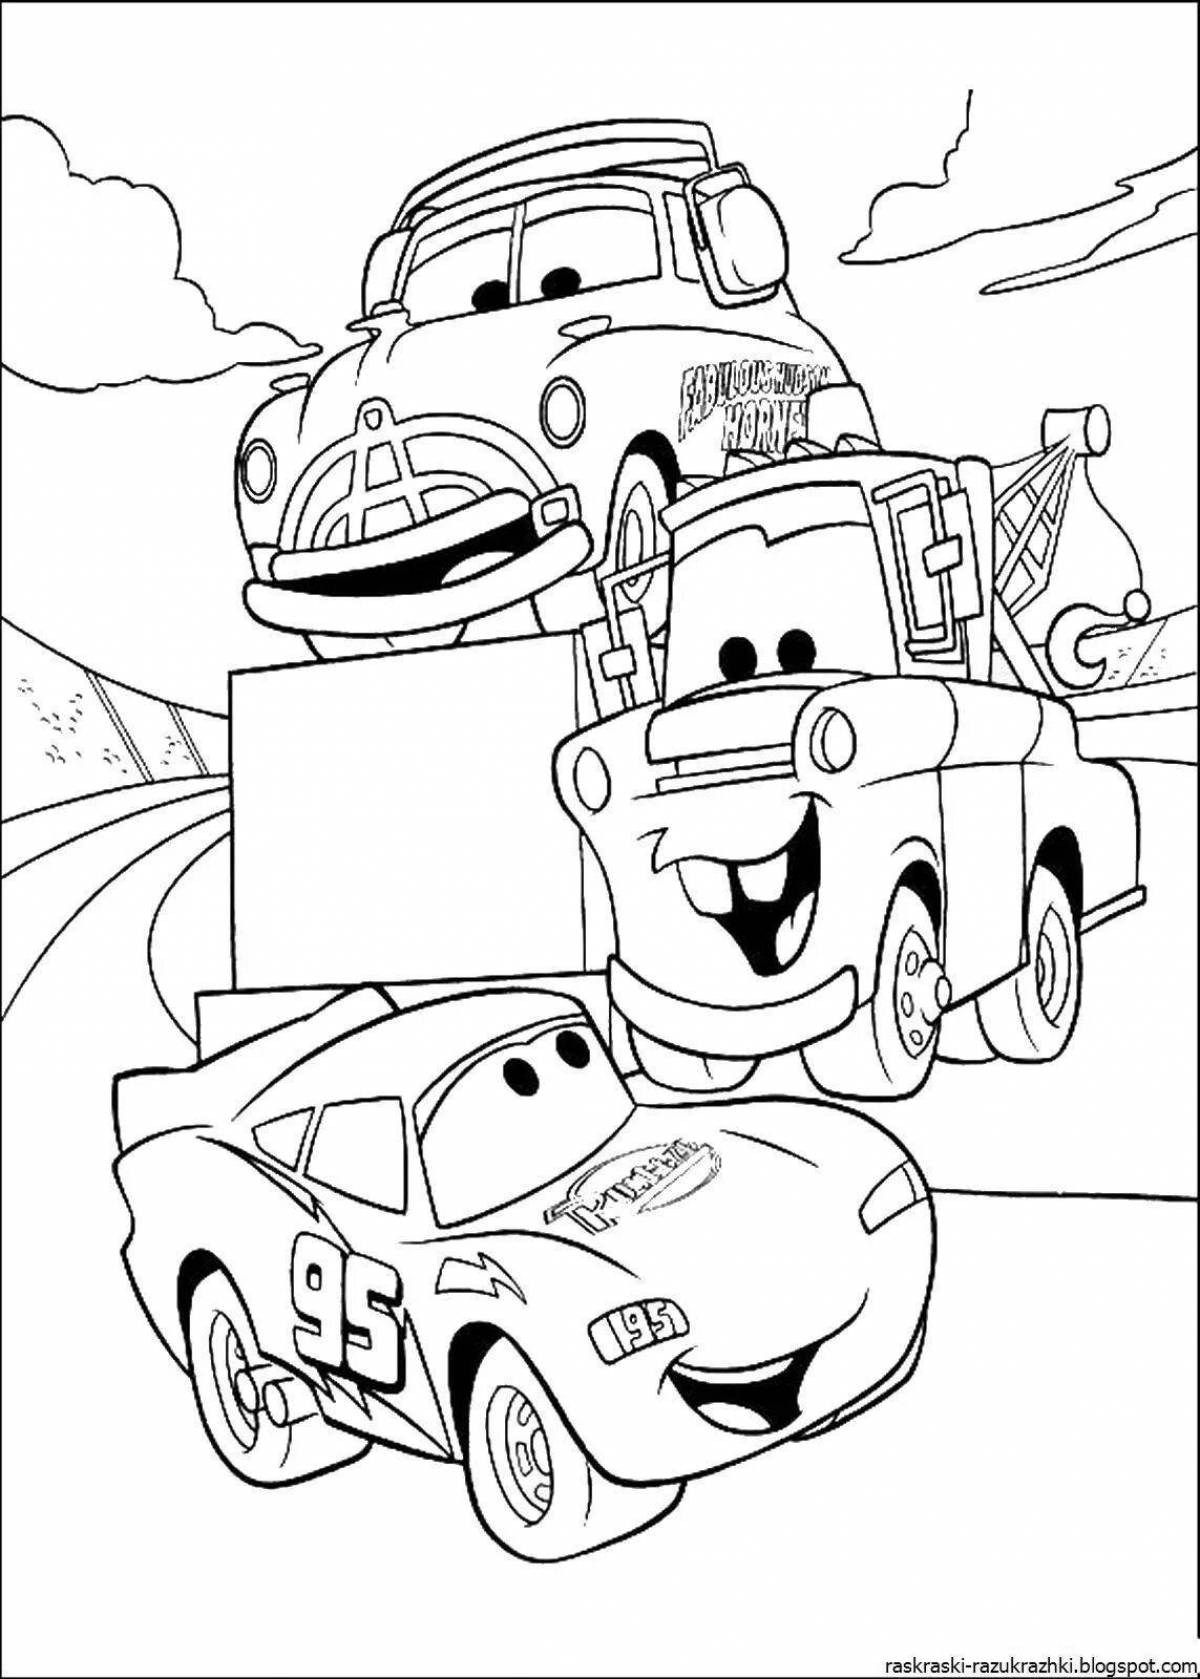 Cars for kids #2